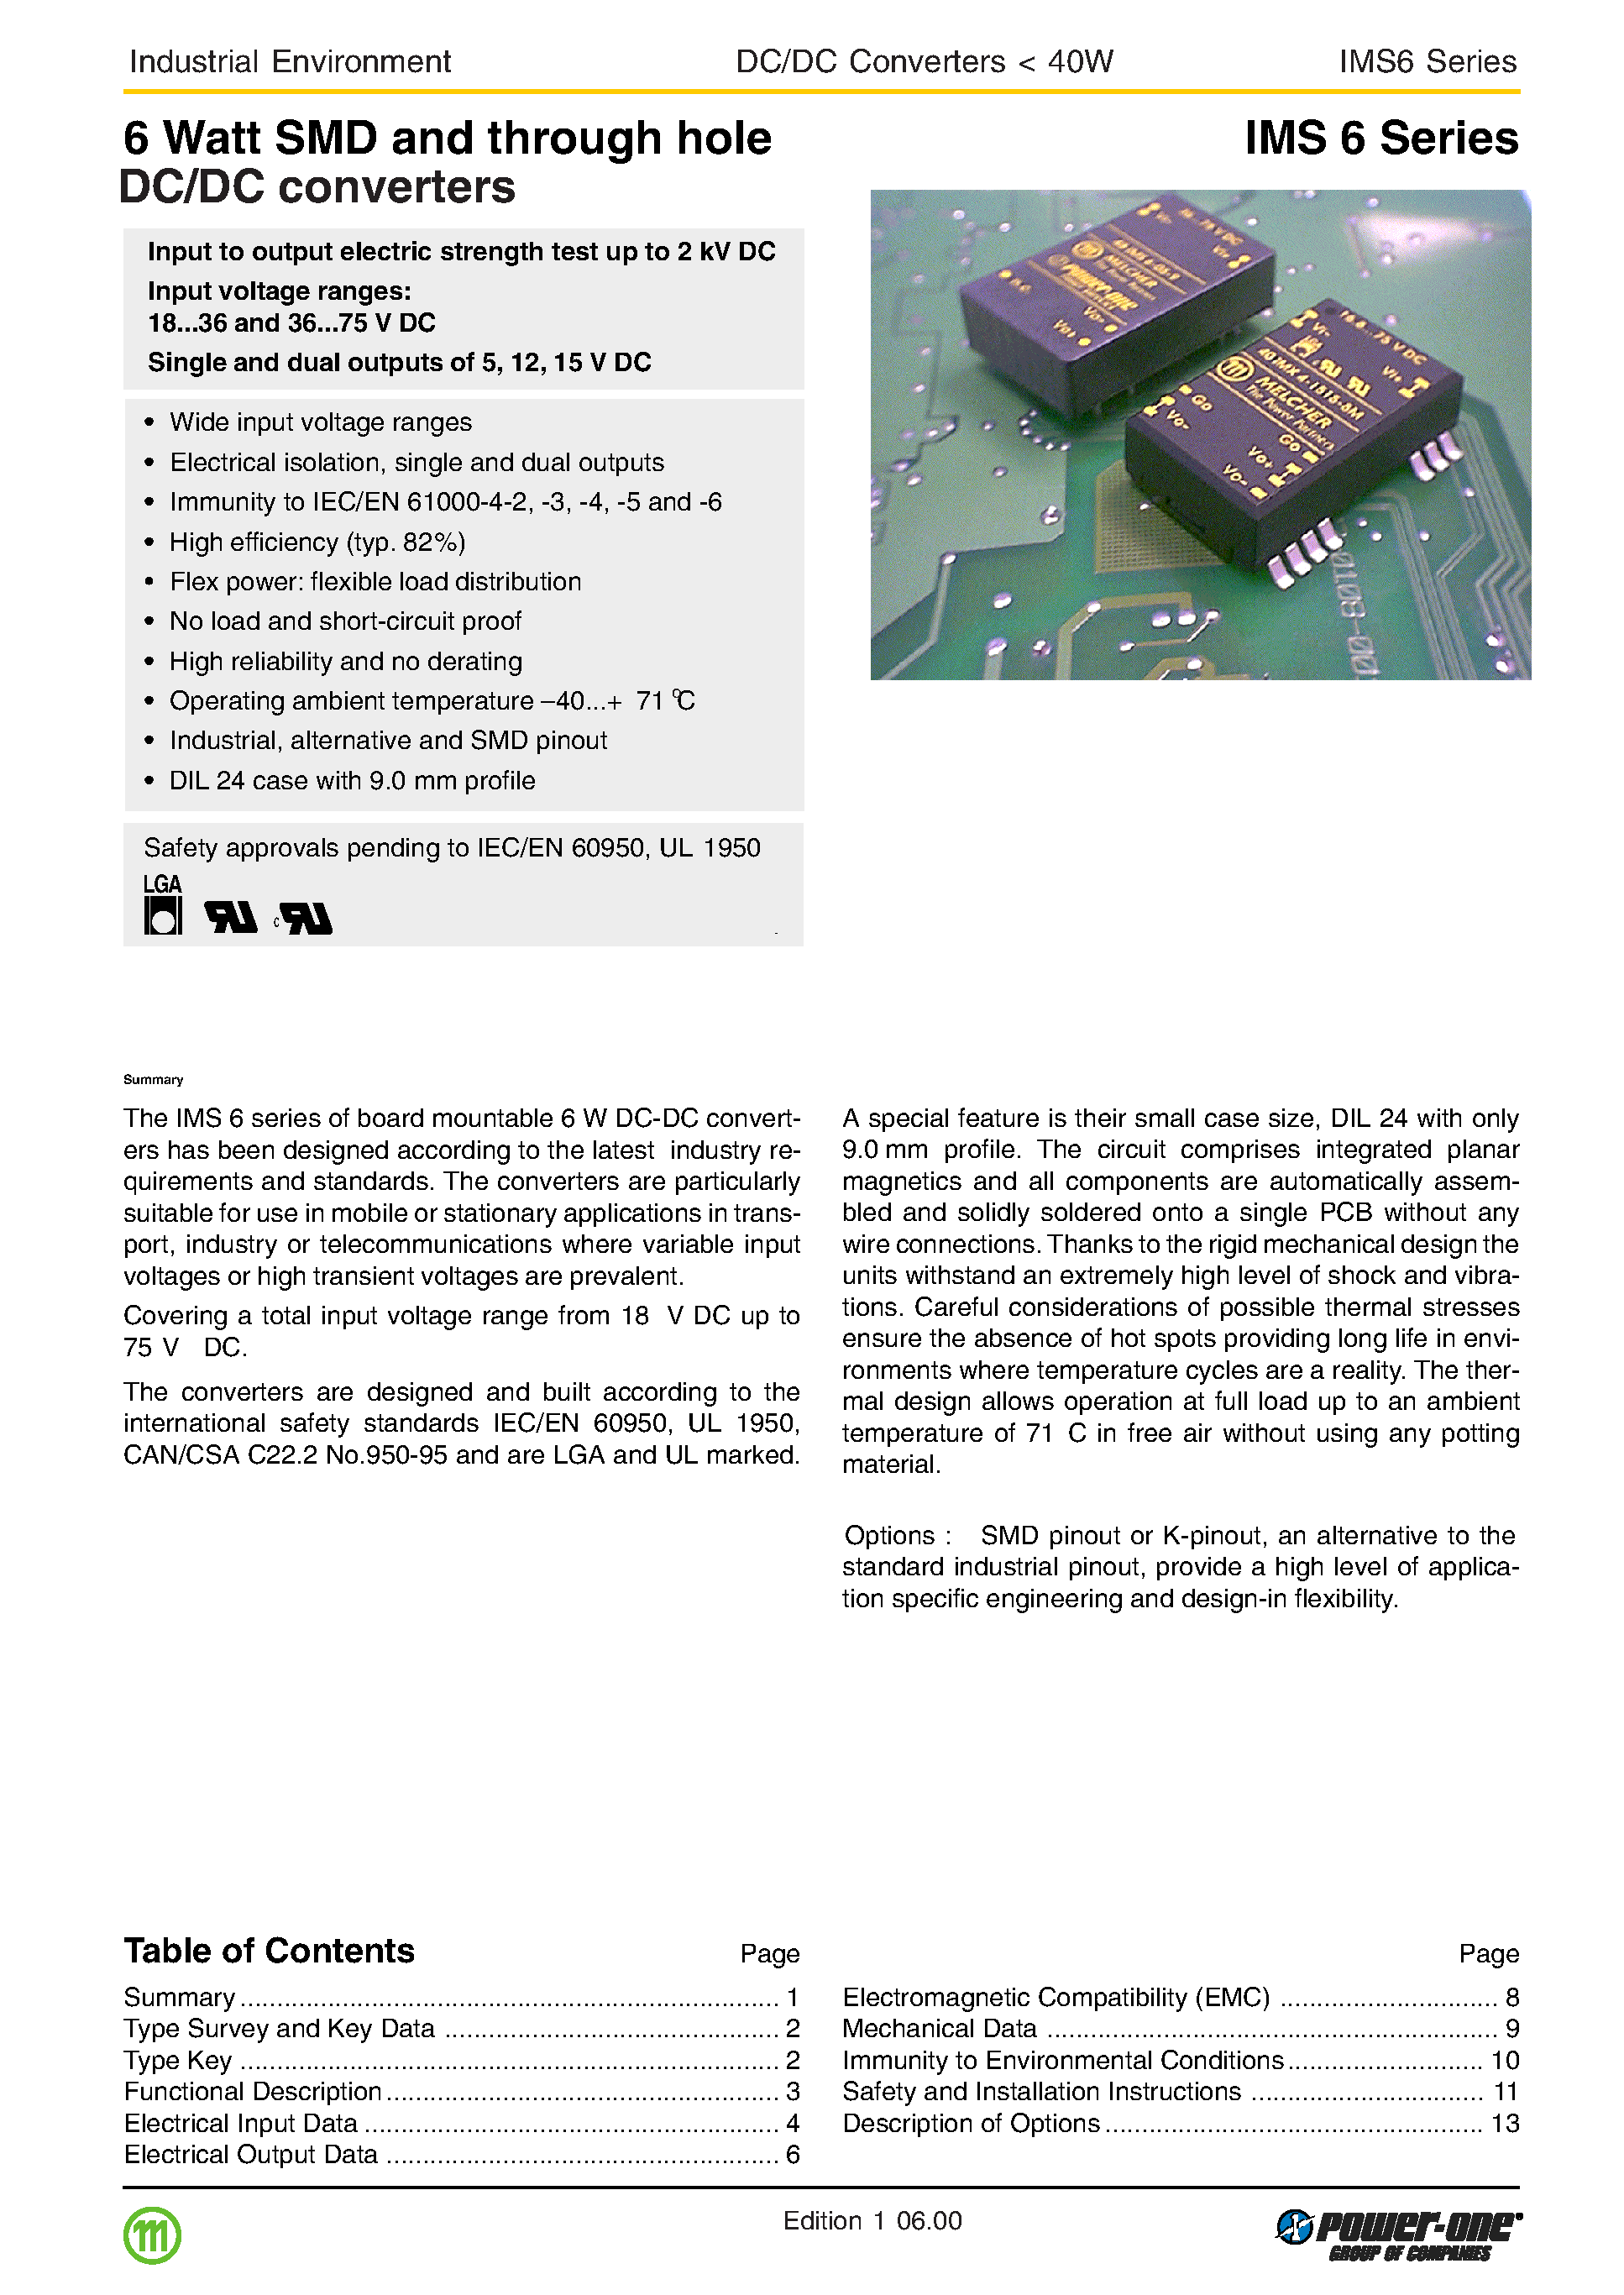 Datasheet 48IMS6-05-9 - 6 Watt SMD and through hole DC/DC converters page 1